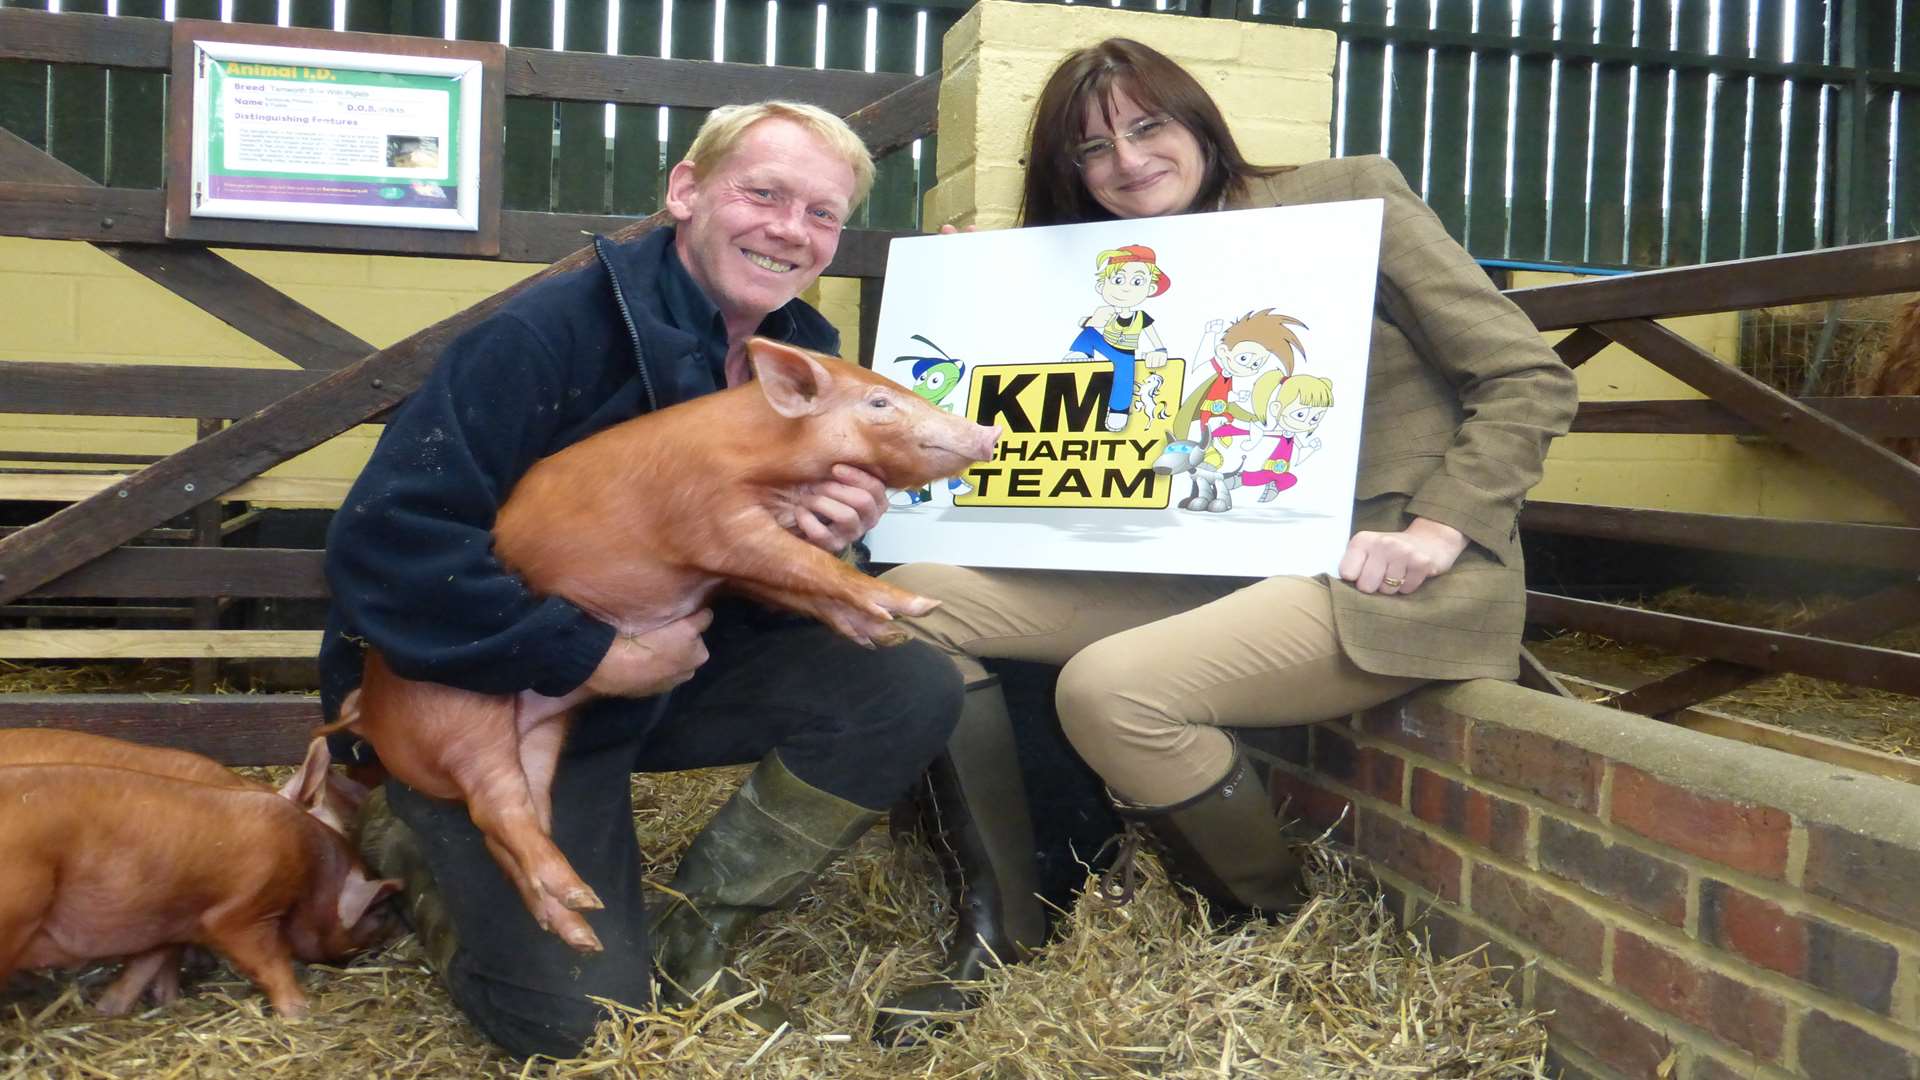 Farmer Davy McColm and Joanne Creighton, chief executive of the Rare Breeds Centre, Ashford.